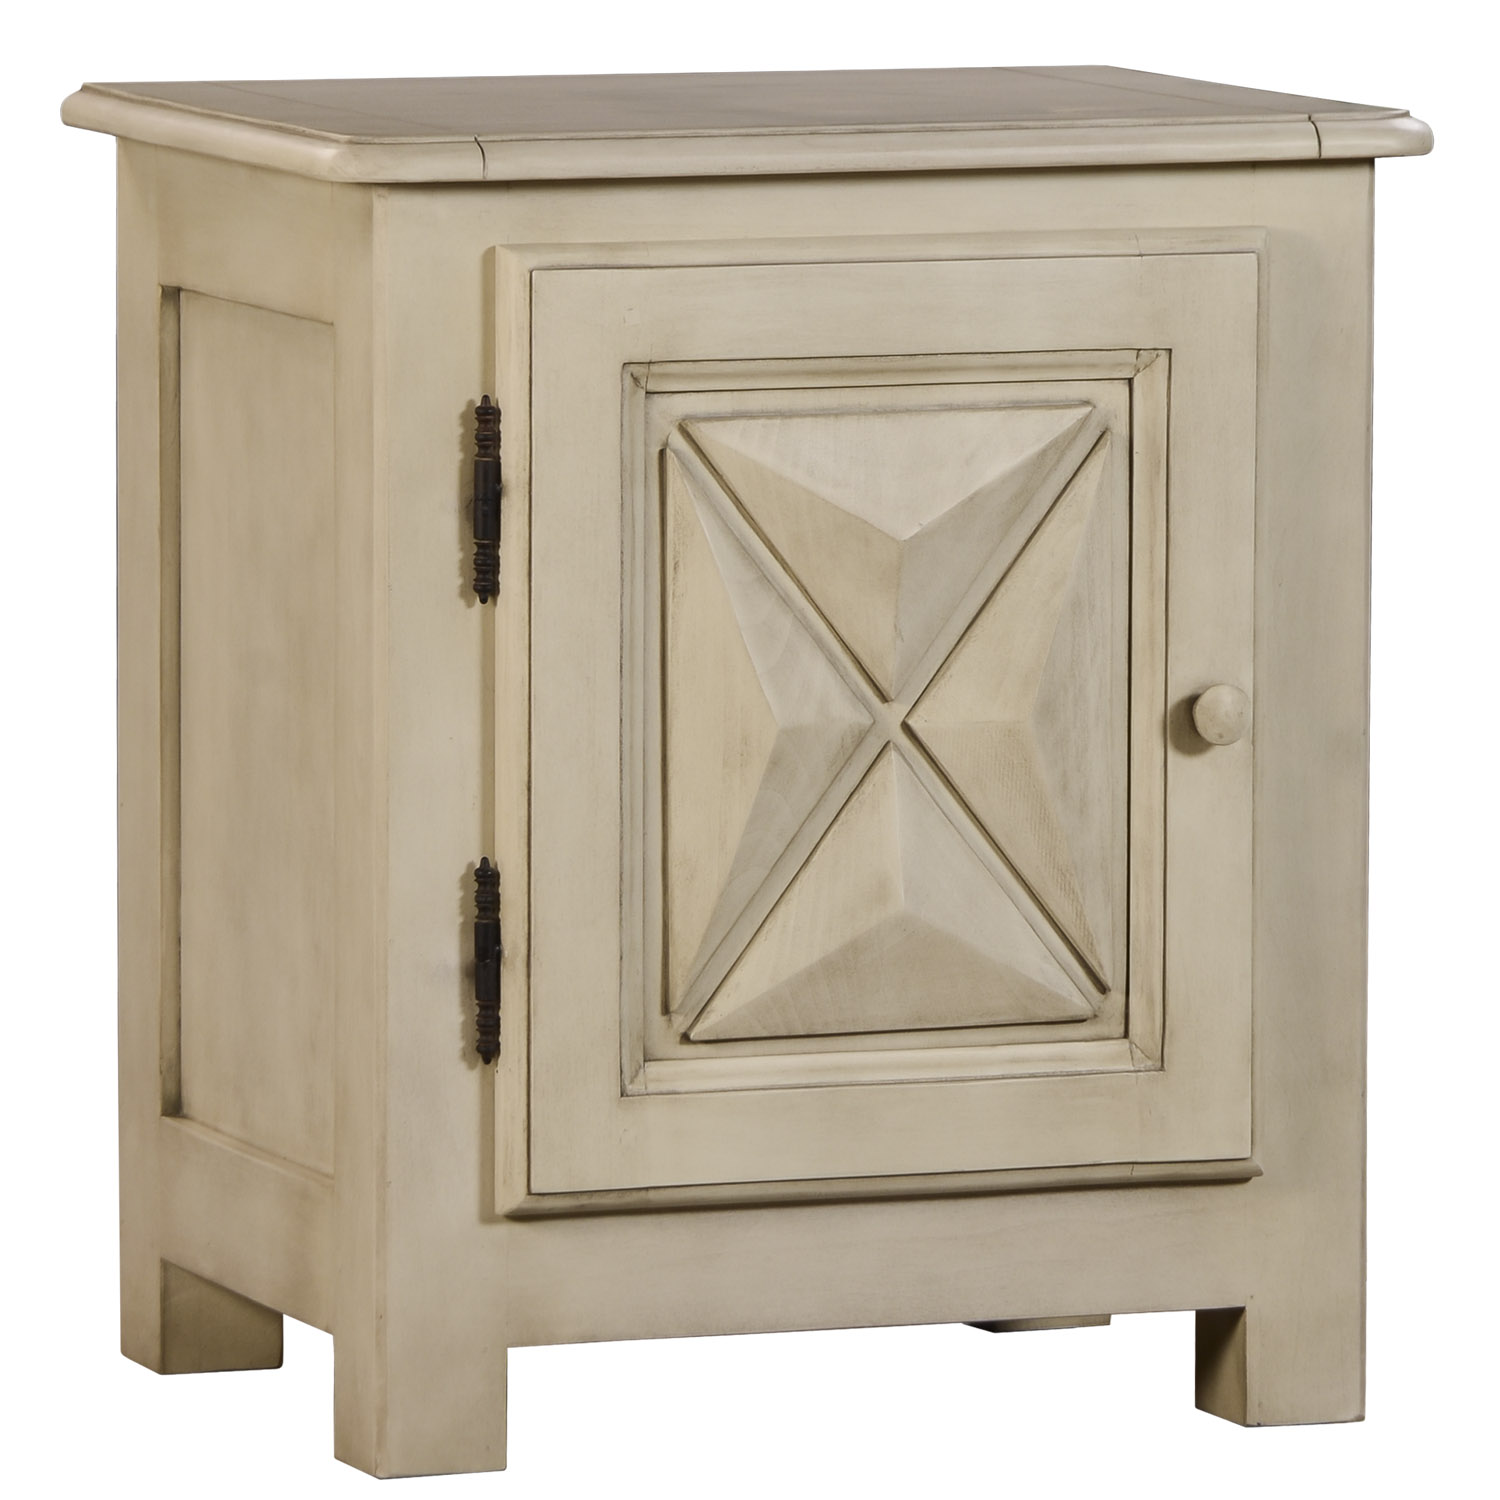 Kadina transitional traditional cabinet side table nightstand with diamond x detail pattern in one door by Woodland furniture in Idaho Falls